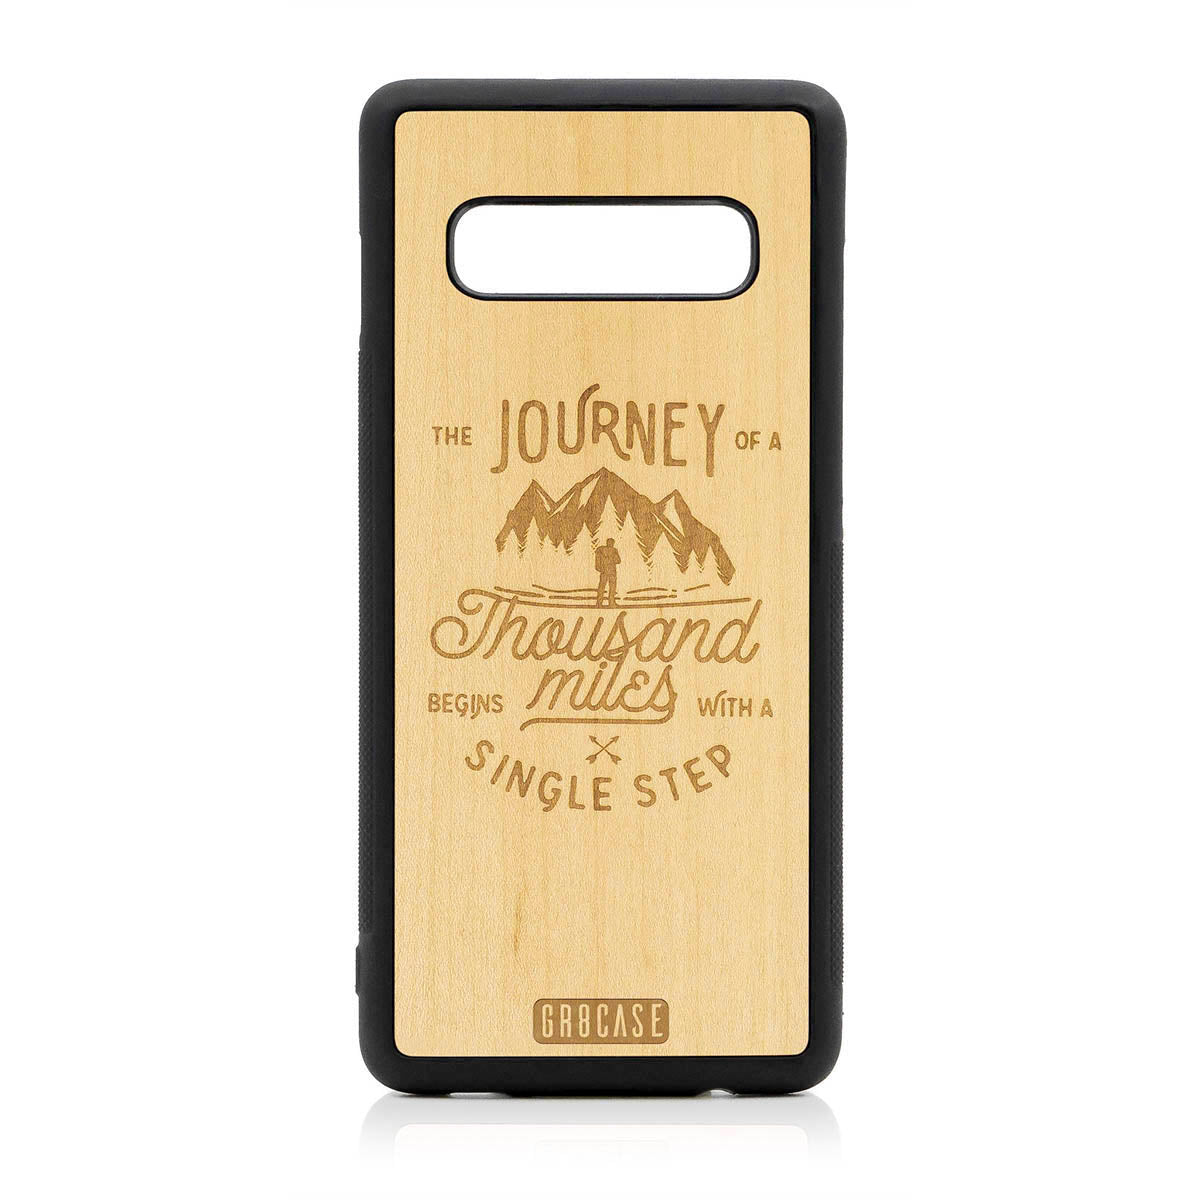 The Journey Of A Thousand Miles Begins With A Single Step Design Wood Case For Samsung Galaxy S10 Plus